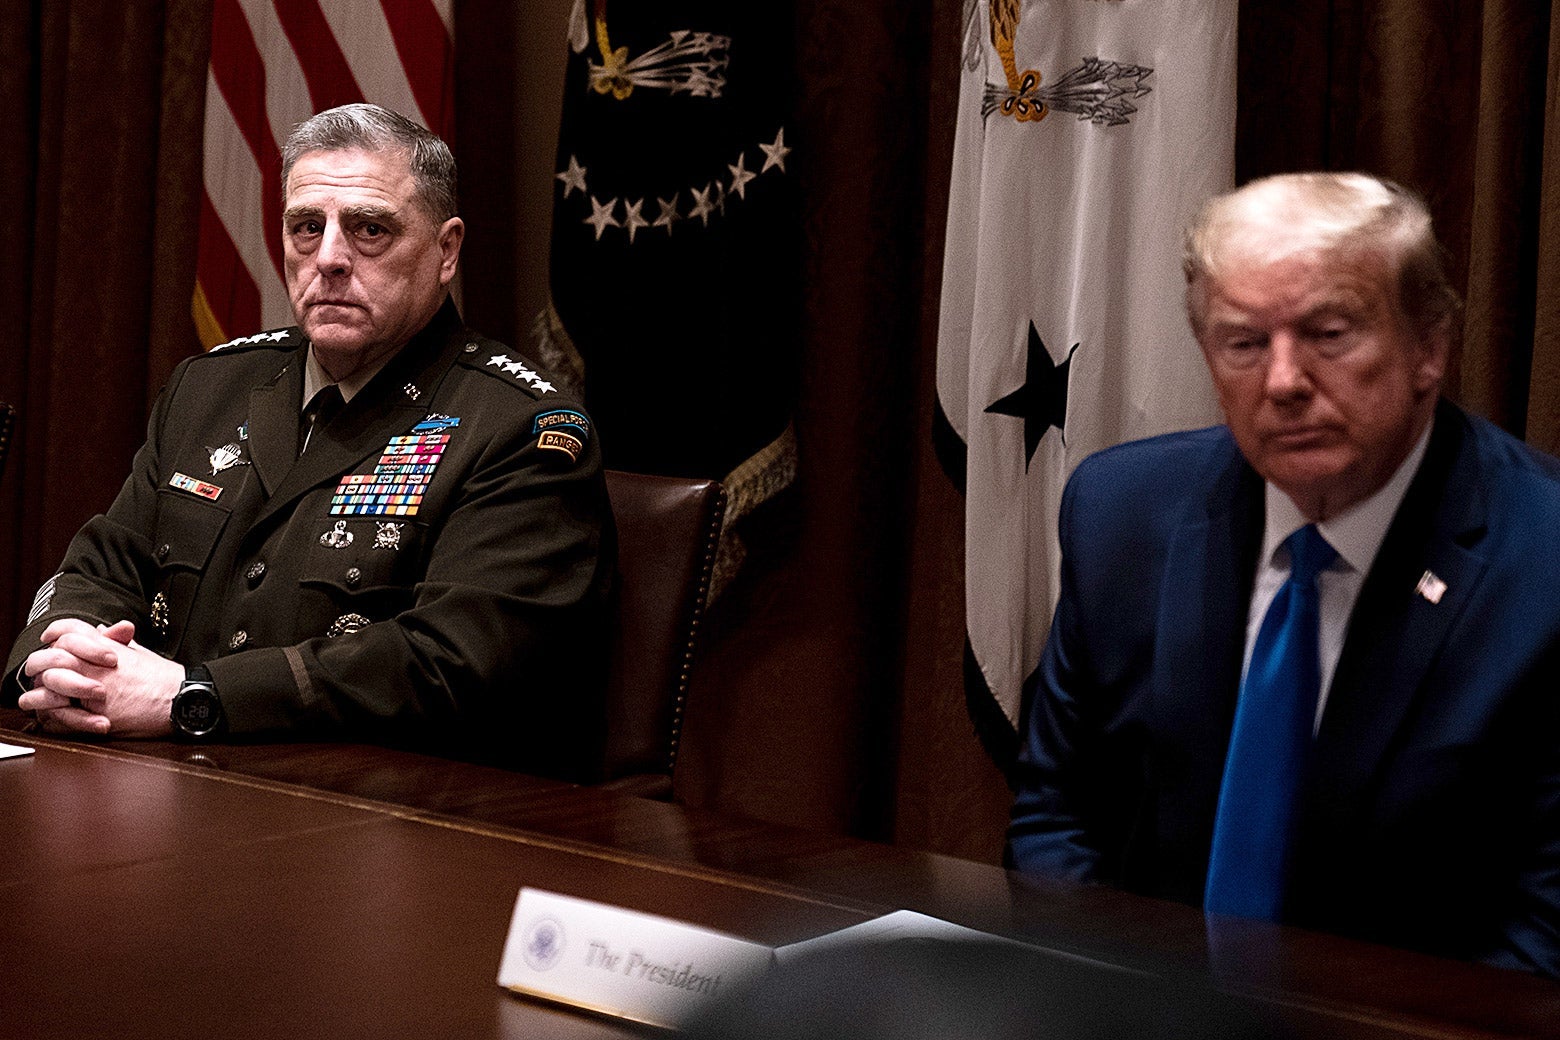 Mark Mille­y sits at a table with Trump. Milley's hands are folded on the table and he is in military uniform. Trump is wearing a suit.